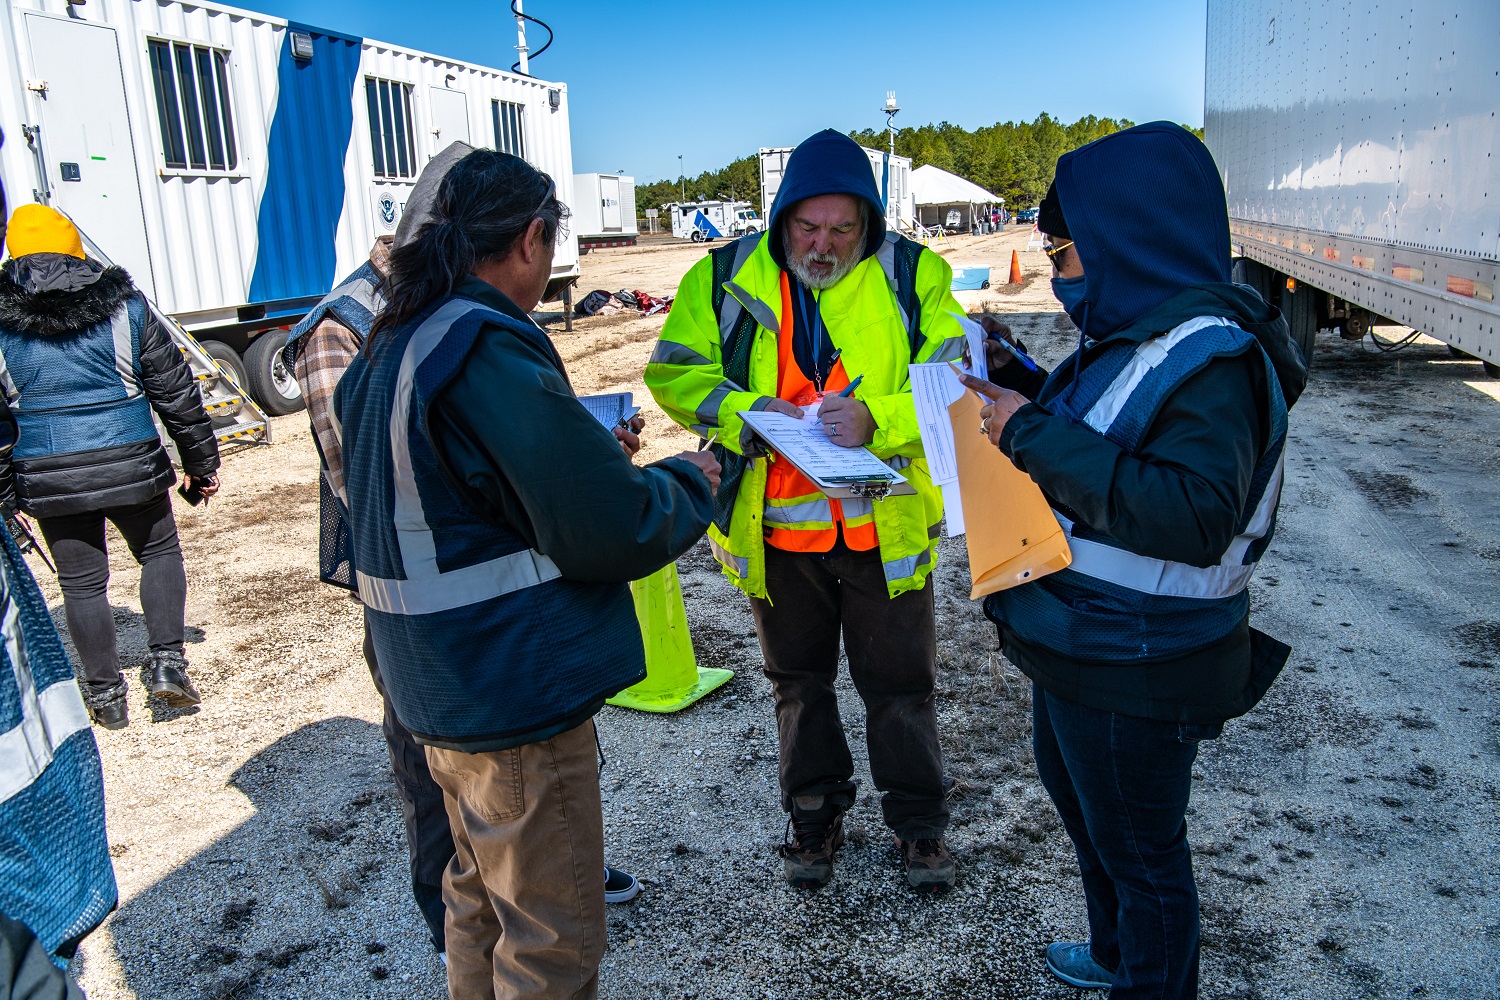 Employees in FEMA safety vests on a cold day.